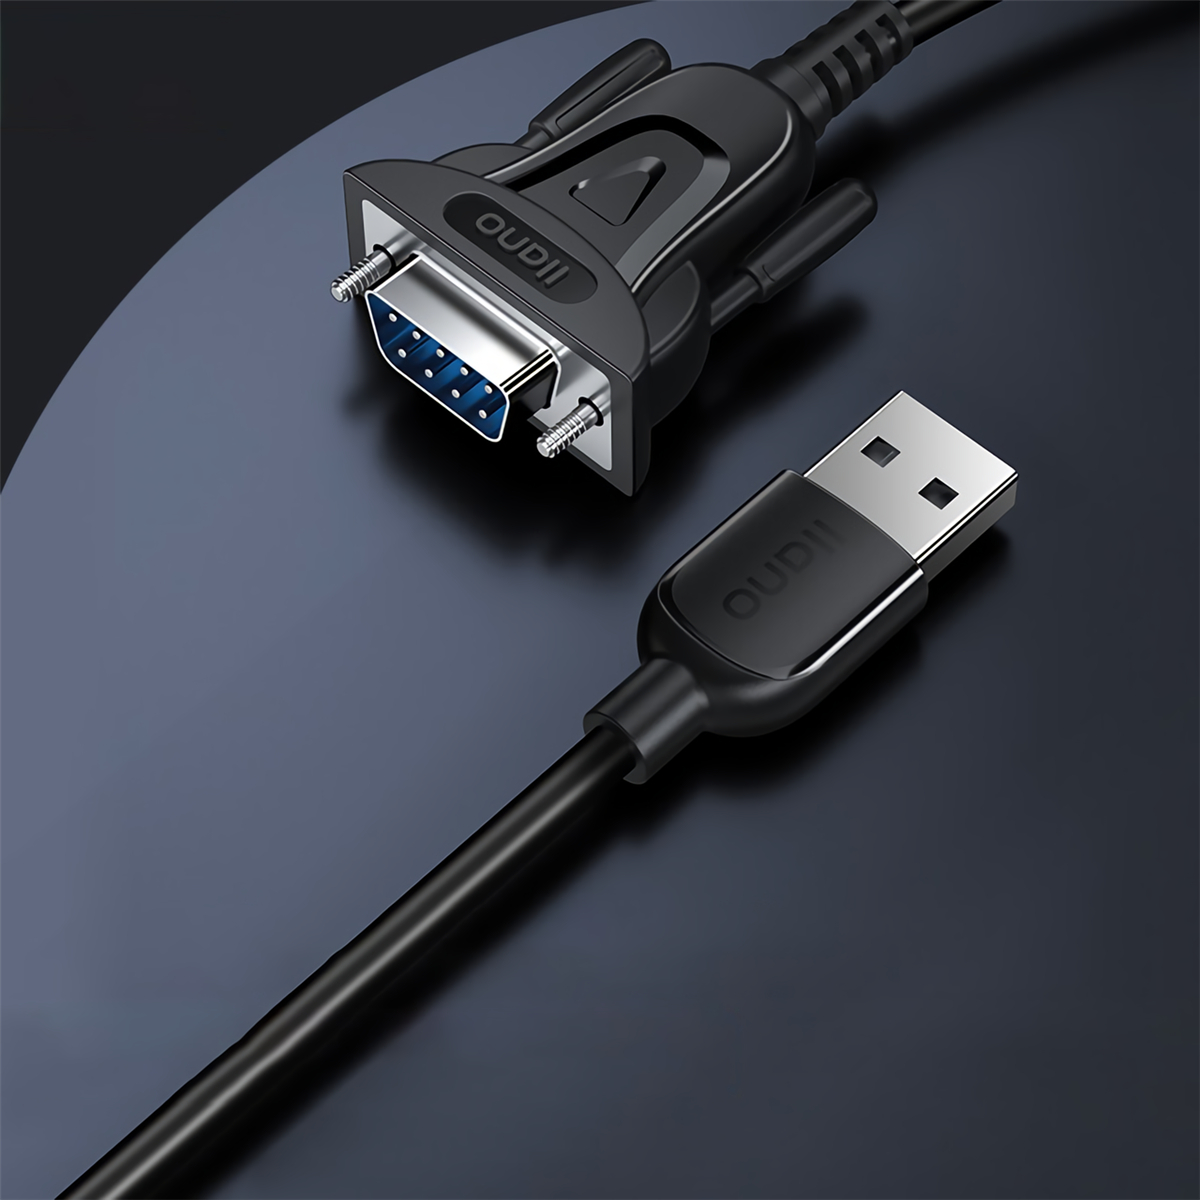 Find llano USB to RS232 Serial Cable USB to DB 9Pin Cable Adapter PL2303 Chip for Windows 7 8 1 XP Vista for Mac OS USB RS232 COM for Sale on Gipsybee.com with cryptocurrencies